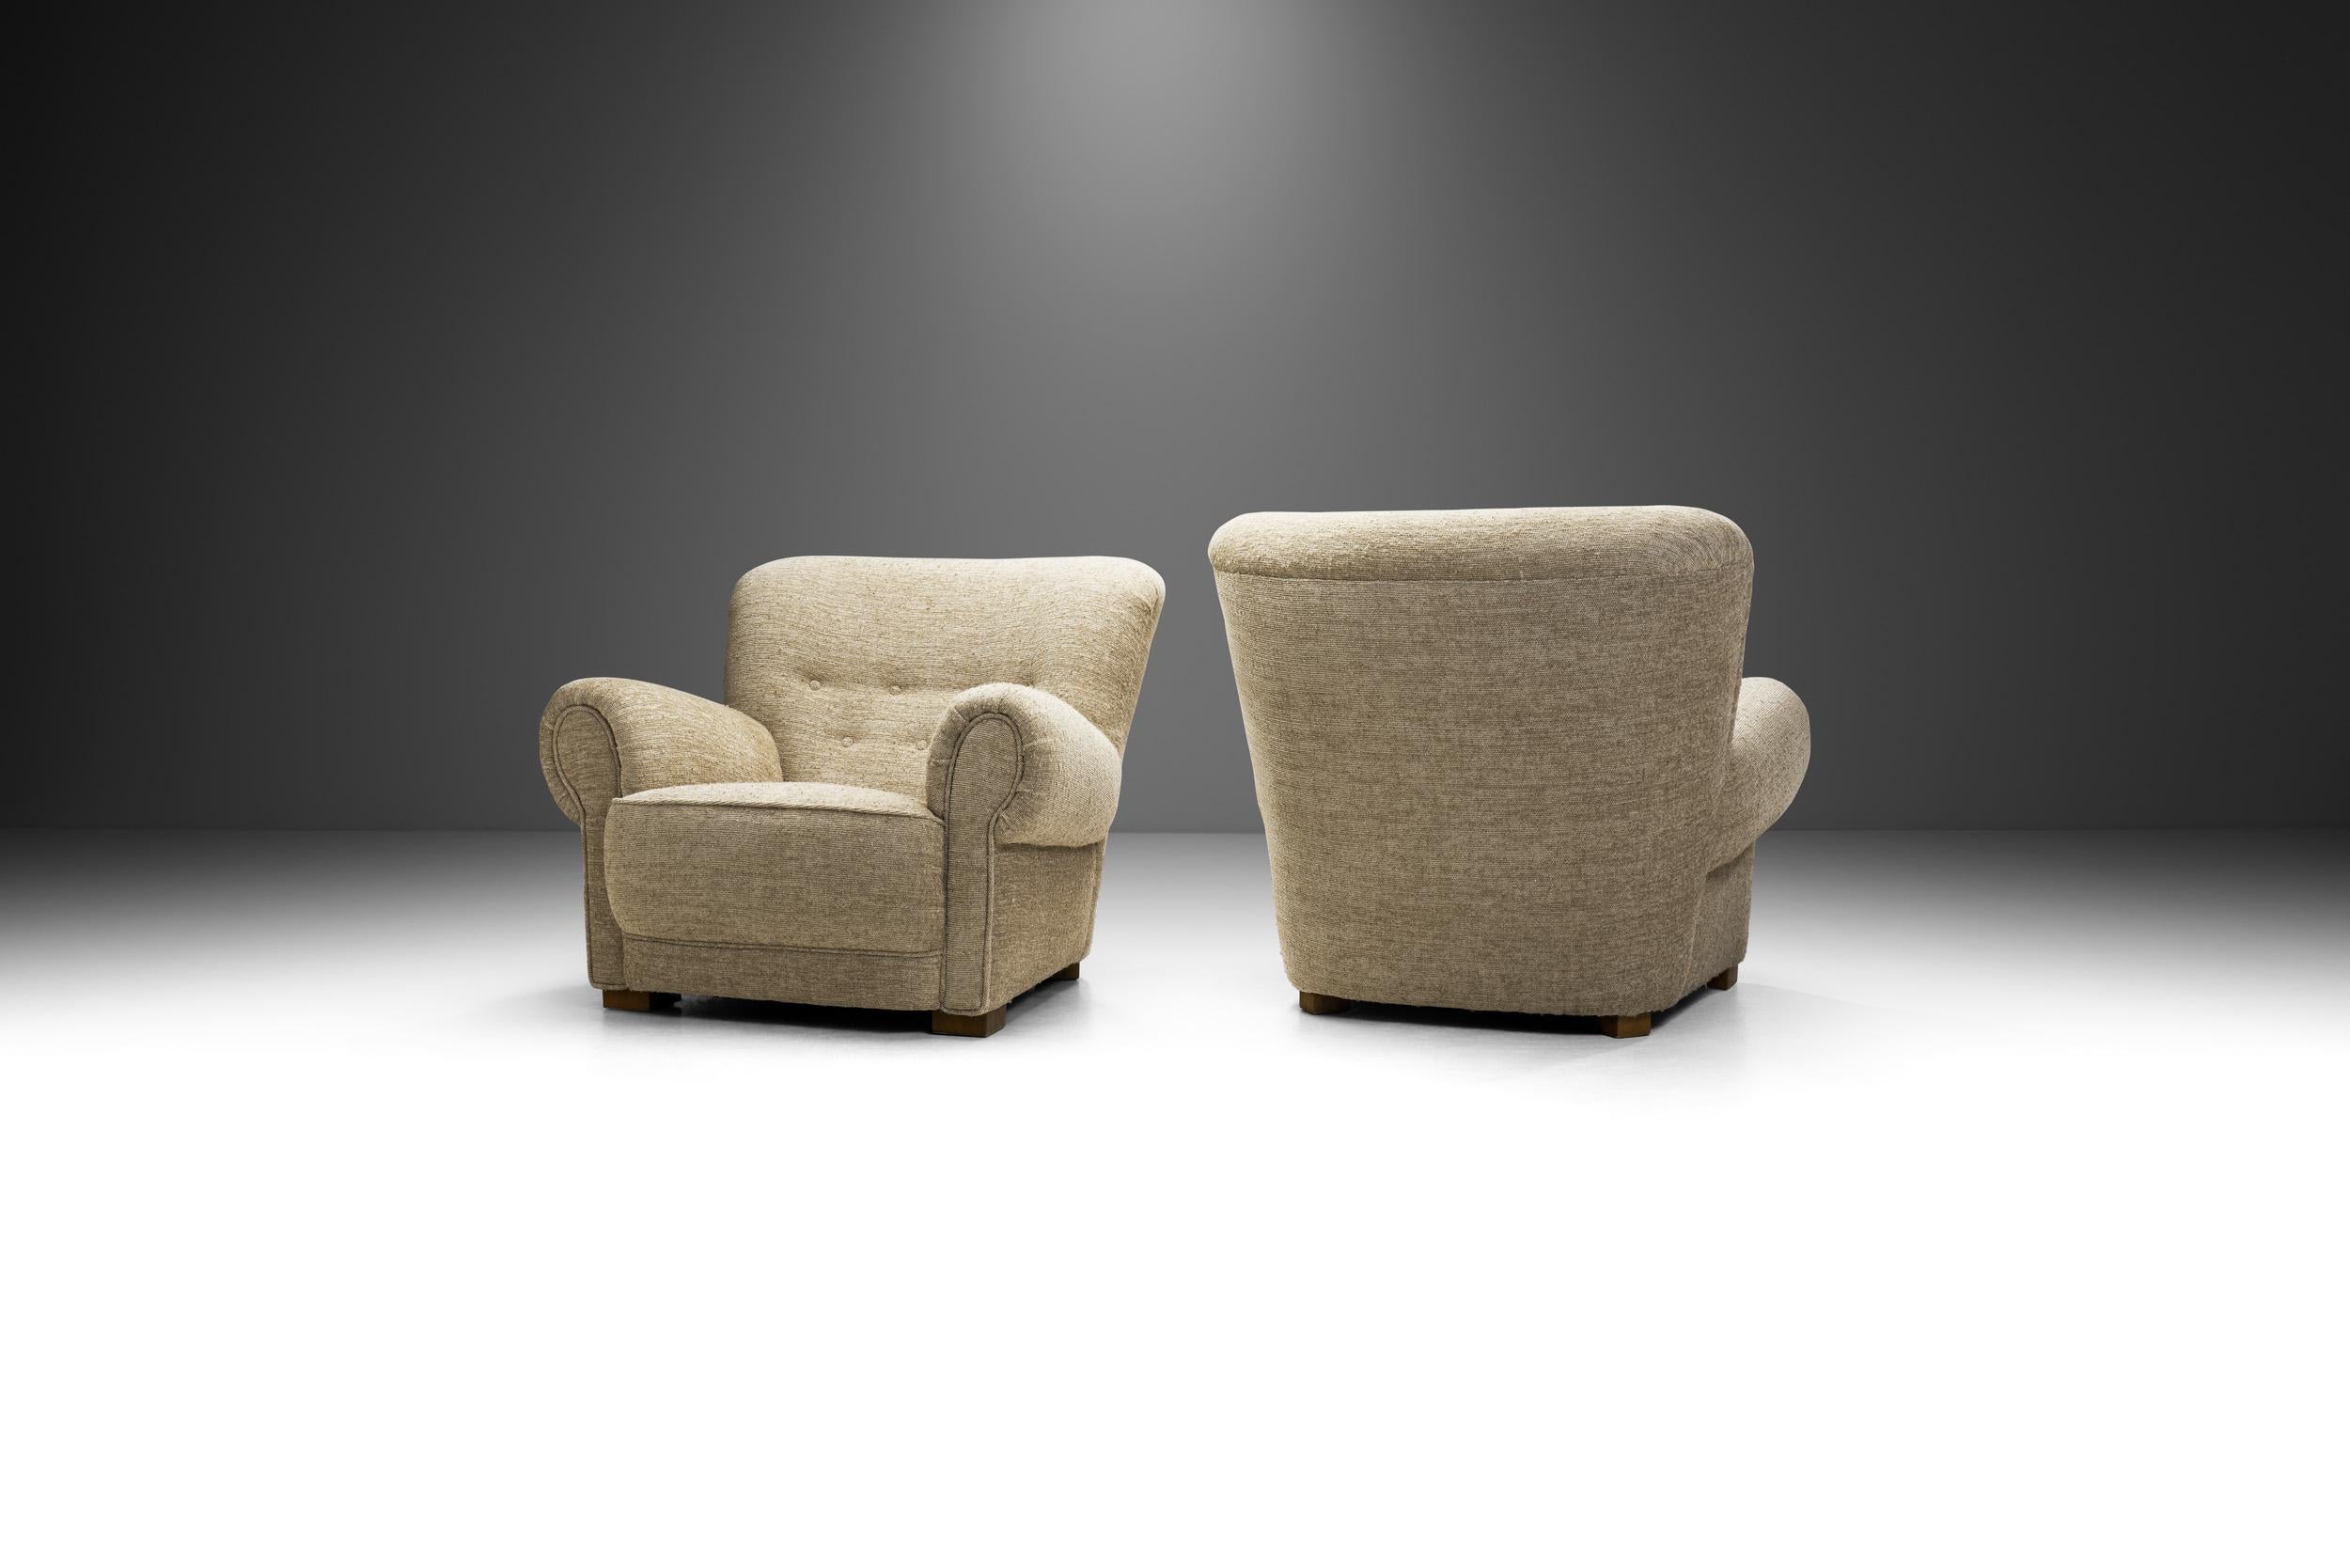 Danish Modern designers are the undisputed masters of mid-century modern chair design. As this pair shows, their furniture generally united form and function; in every design, they placed the highest demands on comfort and ergonomics. Easy chairs –